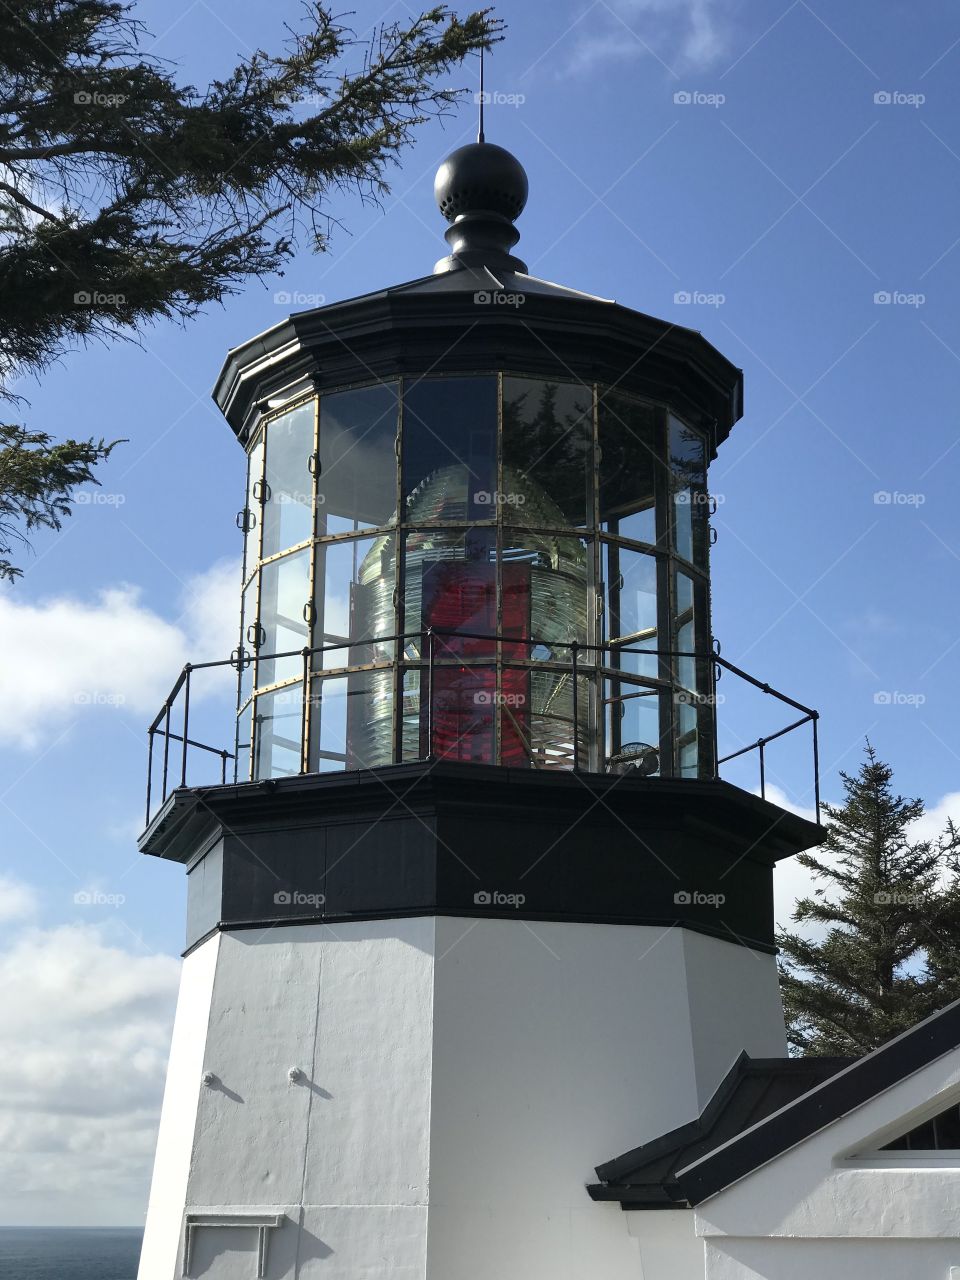 Cape Meares Light a beacon for weary travelers